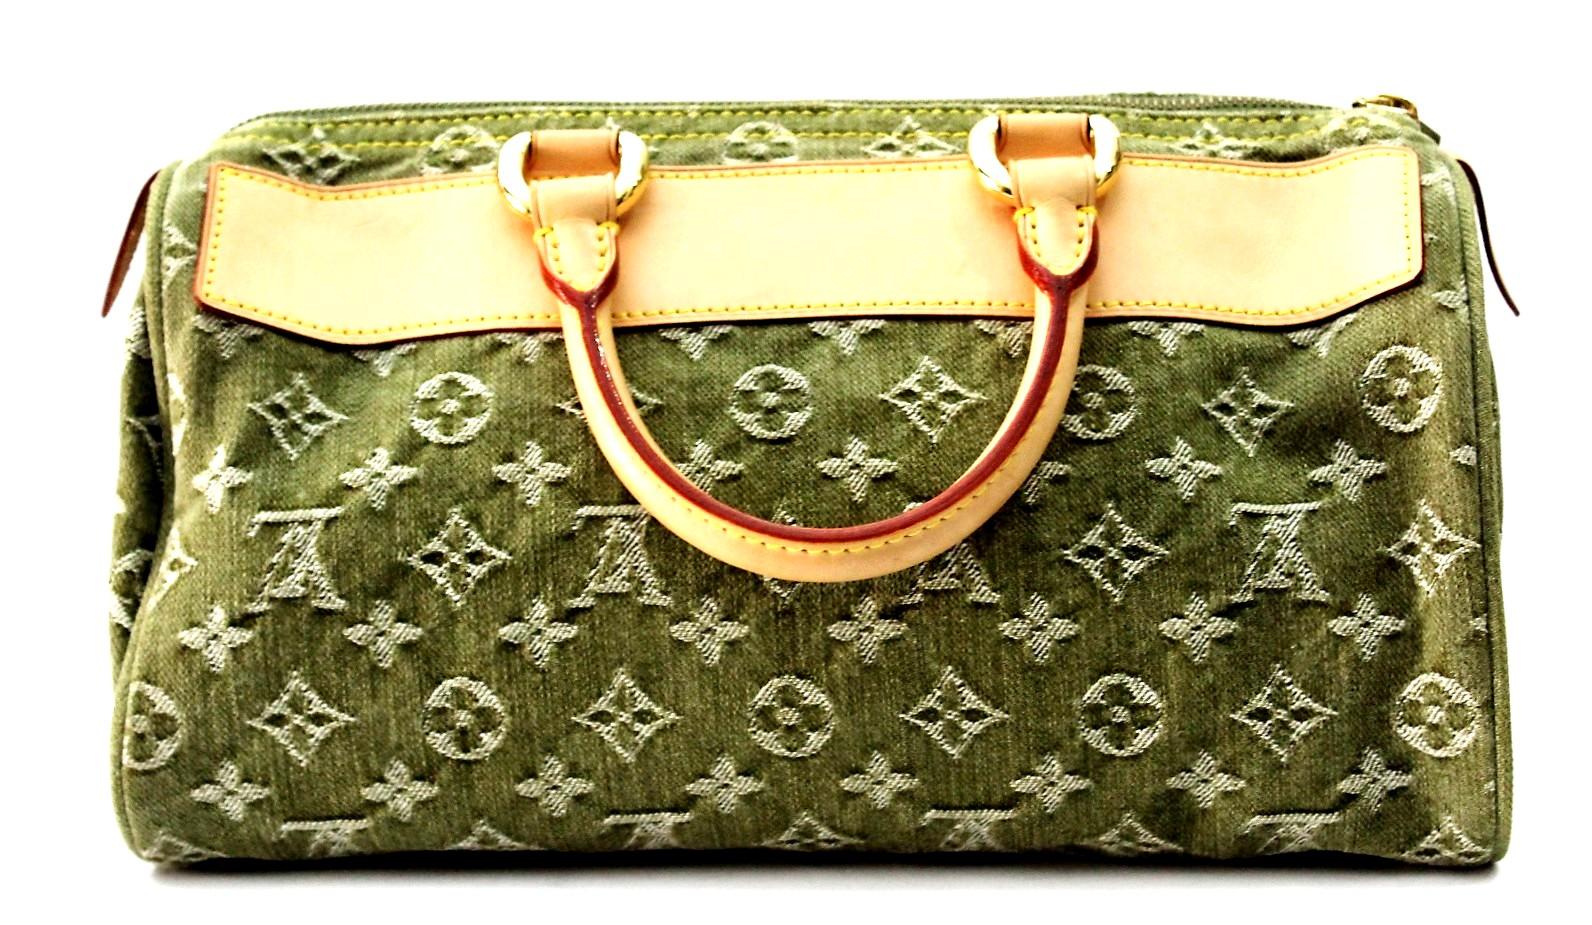 This chic Speedy tote is crafted of Louis Vuitton monogram denim in green. This bag features rolled leather top handles, a full length front zipper pocket, two exterior flap pockets, a zip top, and polished brass hardware. The top zipper opens to a